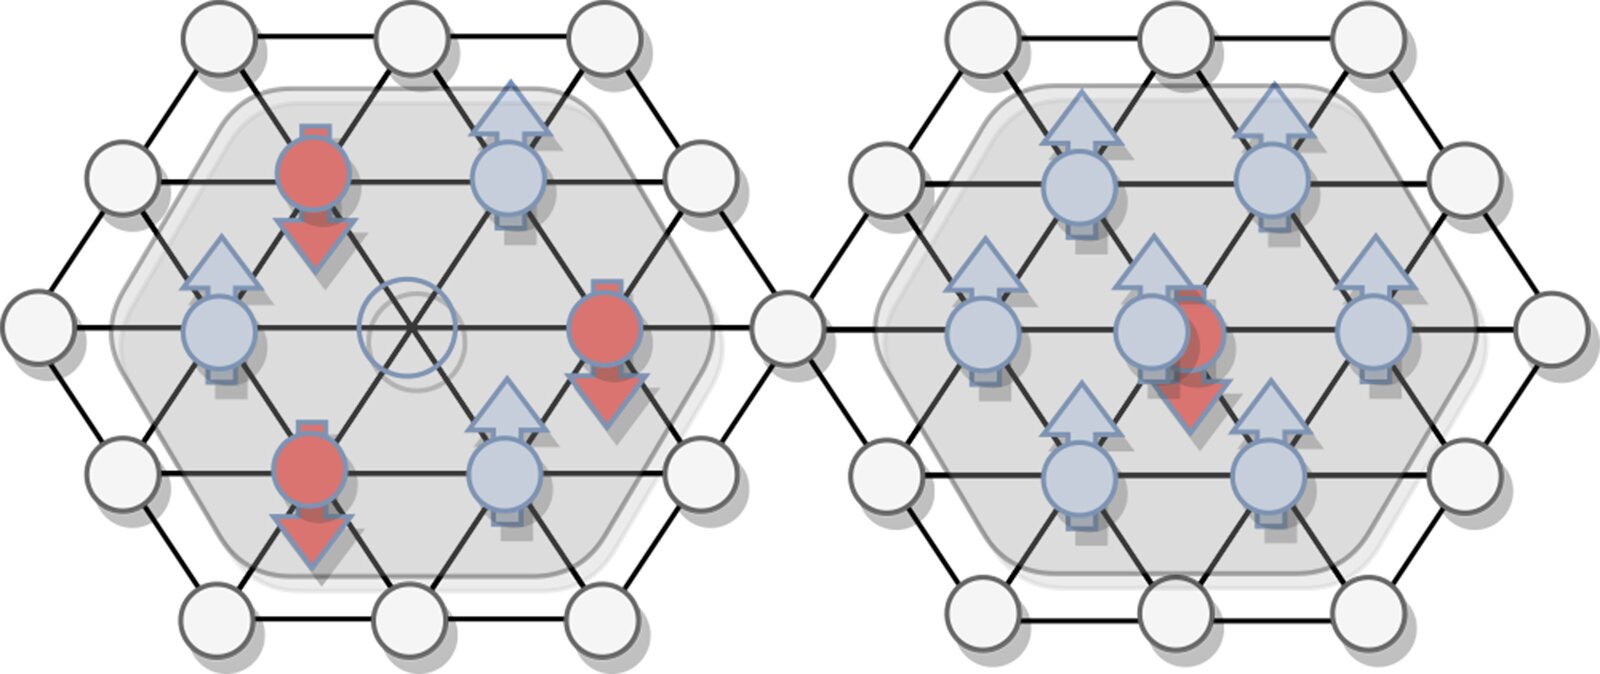 In kinetic magnetism, an extra electron paired up to form a doublon can lead to ferromagnetic order of the spins in its vicinity (right), whereas a missing electron or hole causes antiferromagnetic order (left). Credit: Morera, I. et al. High-temperature kinetic magnetism in triangular lattices. Phys. Rev. Res. 5, L022048 2023)